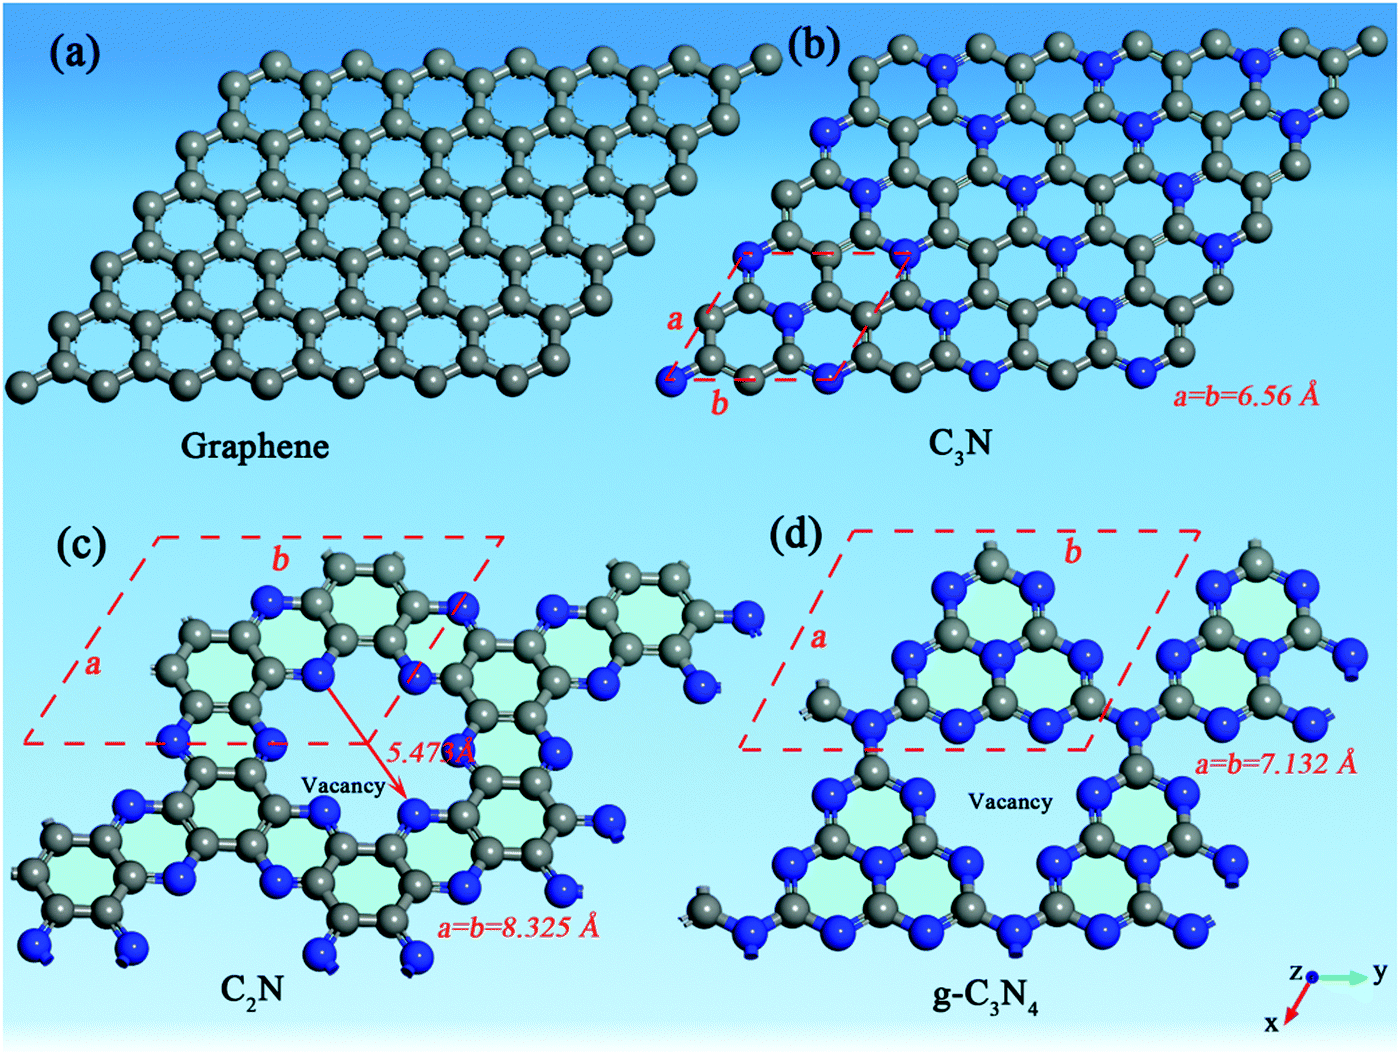 A Systematic Investigation Of The Catalytic Performances Of Monolayer Carbon Nitride Nanosheets C 1 X N X Physical Chemistry Chemical Physics Rsc Publishing Doi 10 1039 D0cpk